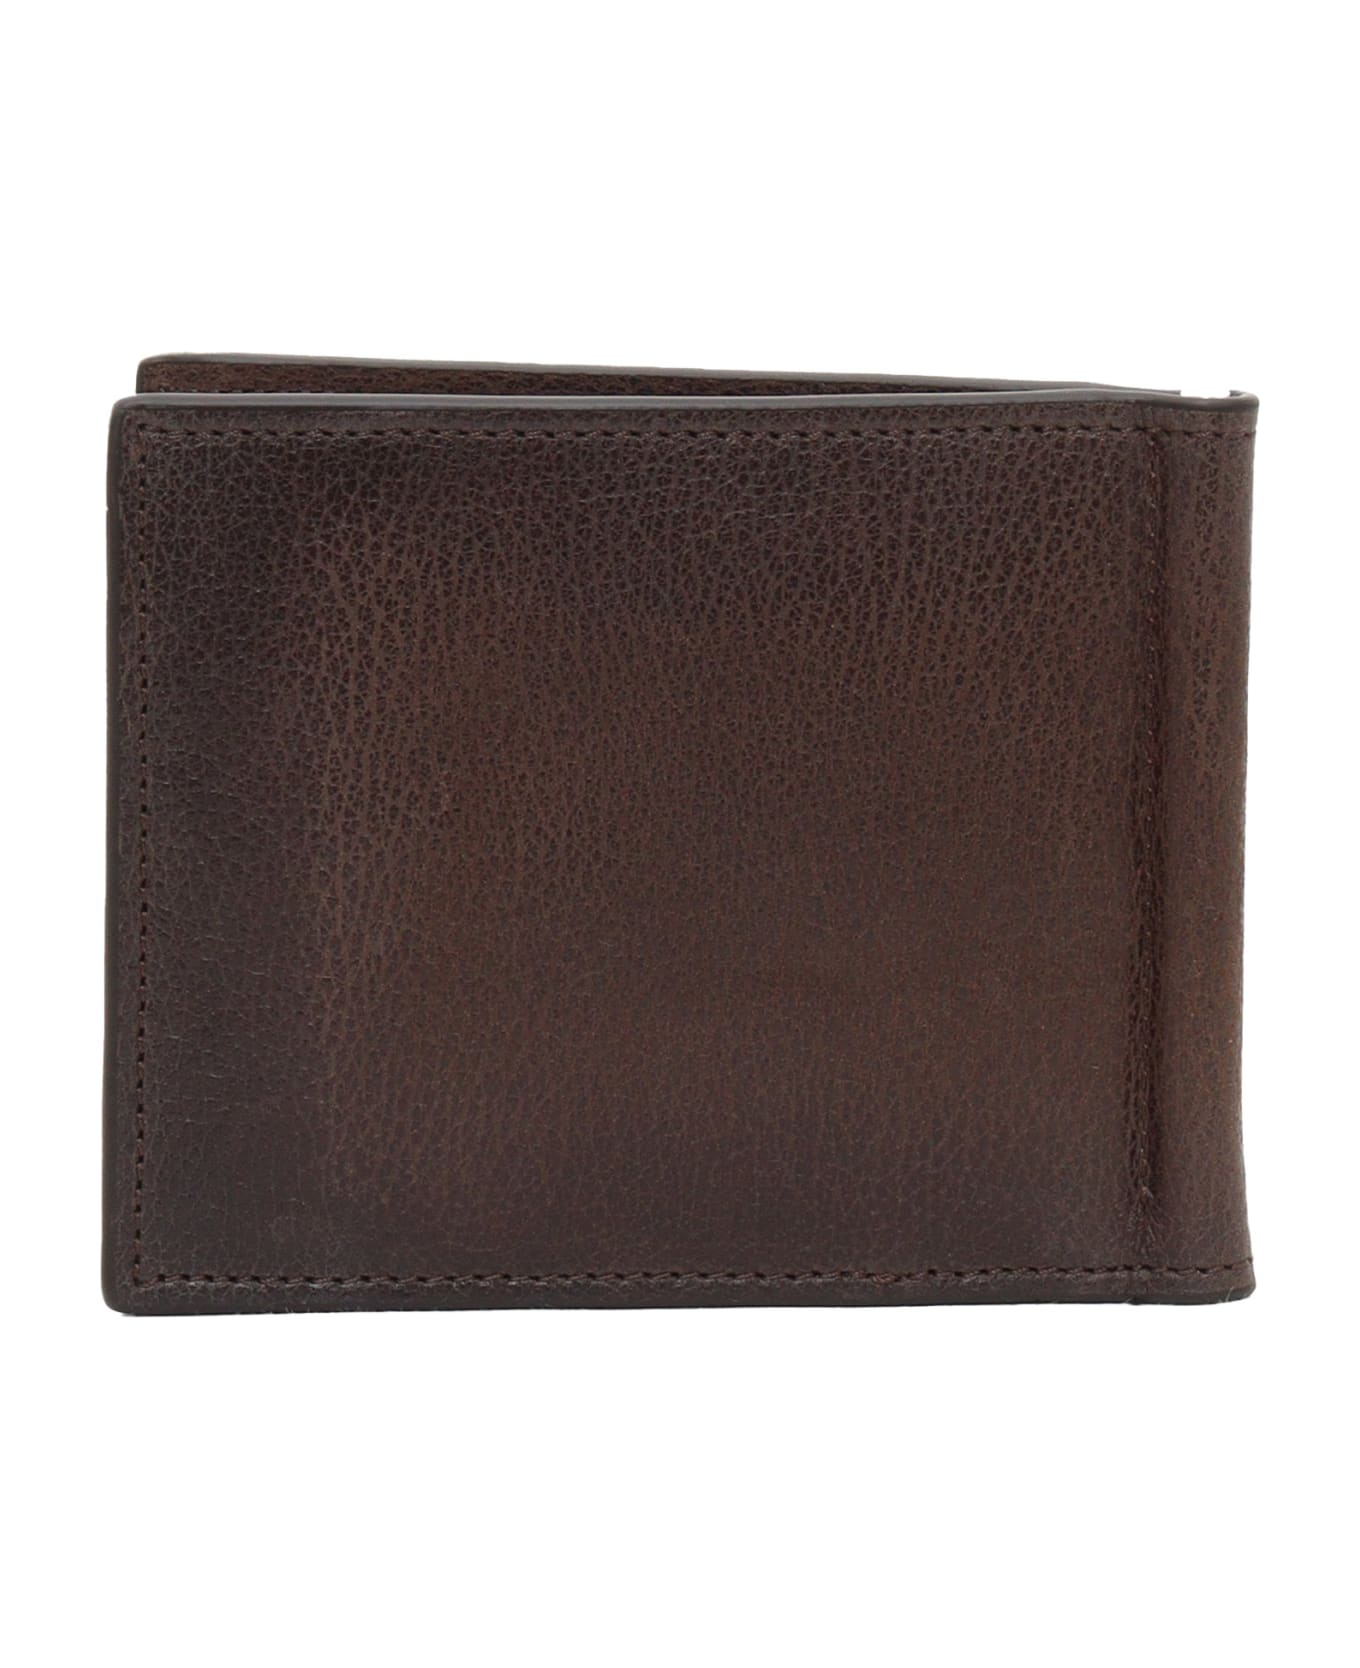 Orciani Brown Wallet - BROWN